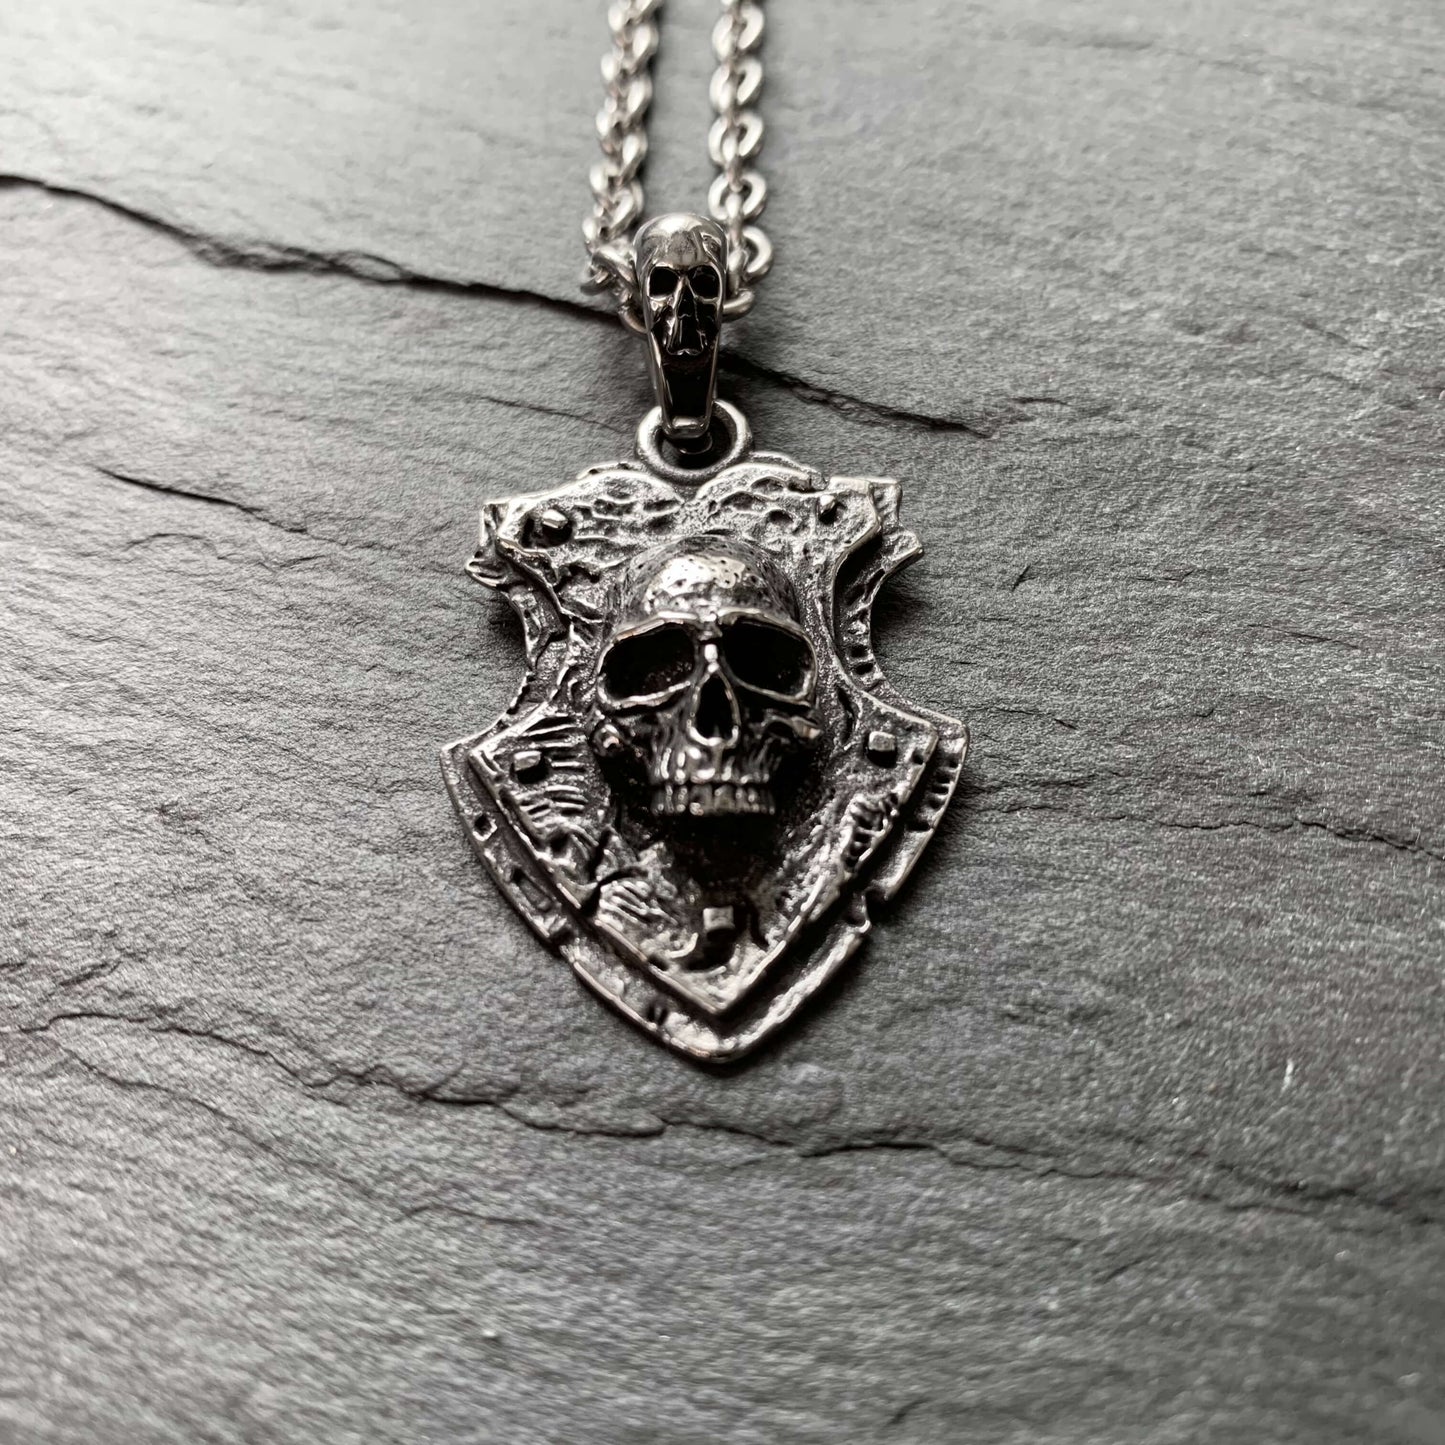 Coat of Arms Necklace